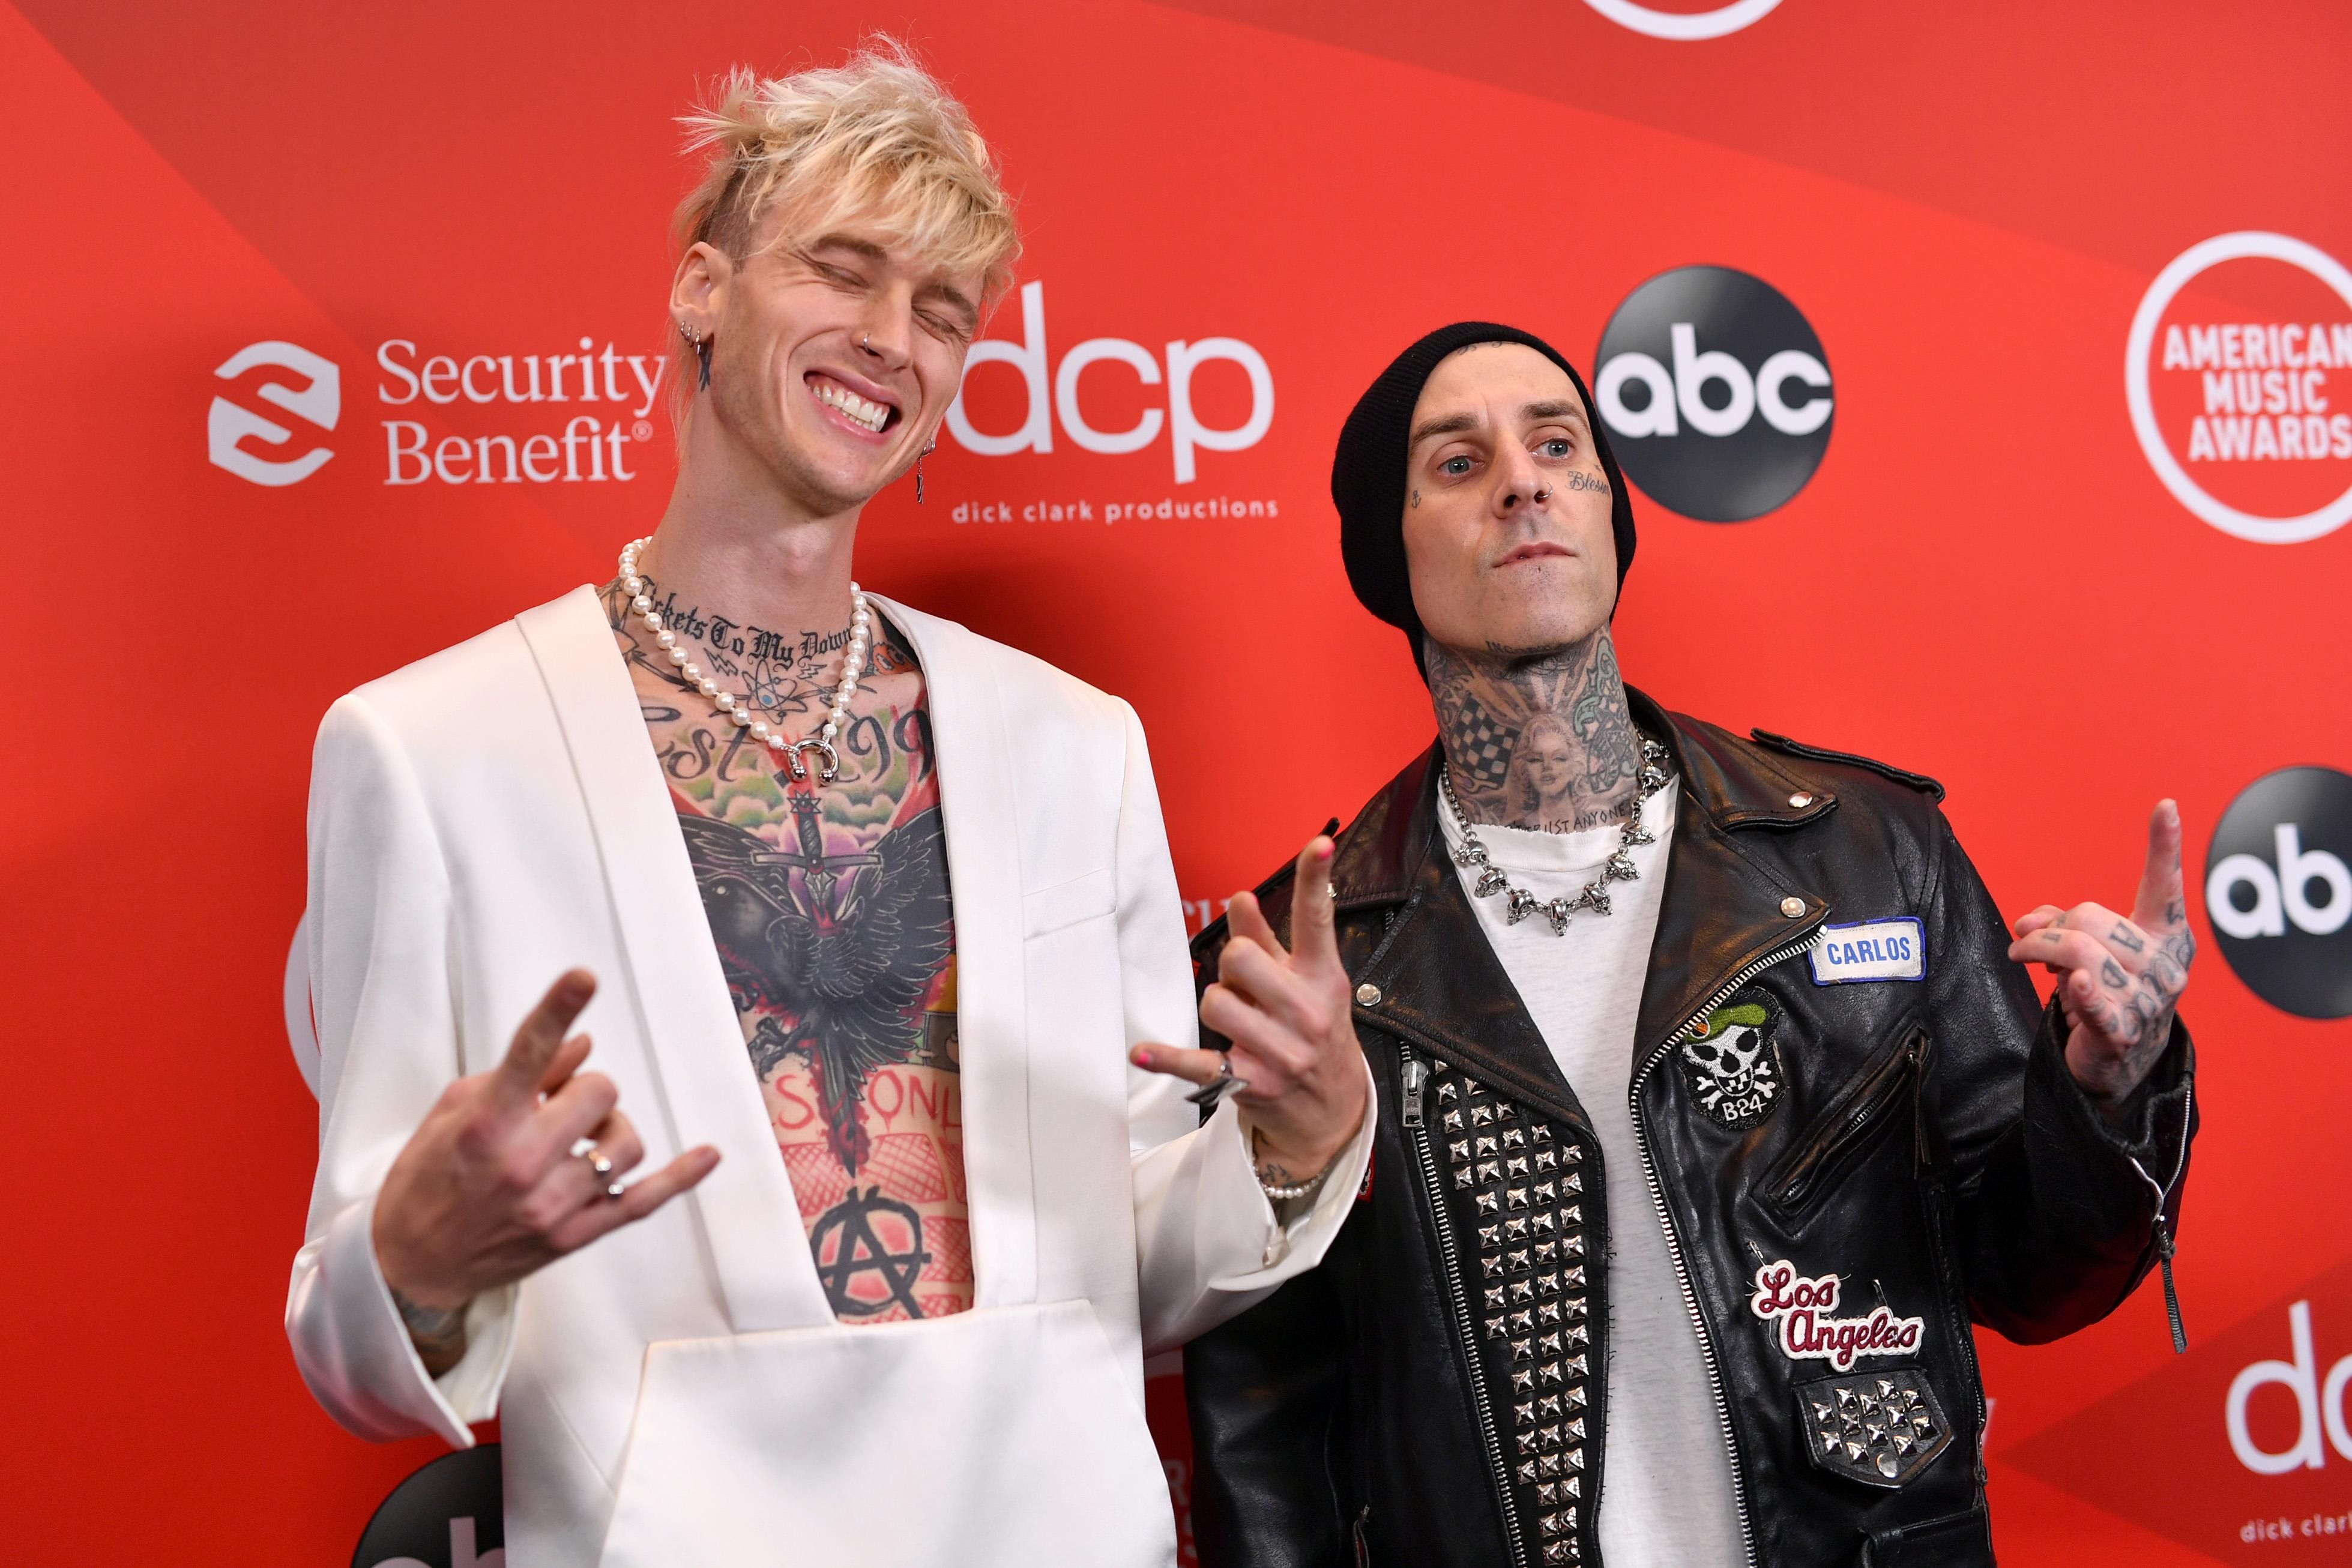 MGK Shares Photo of New Blackout Tattoo After Wiping Instagram